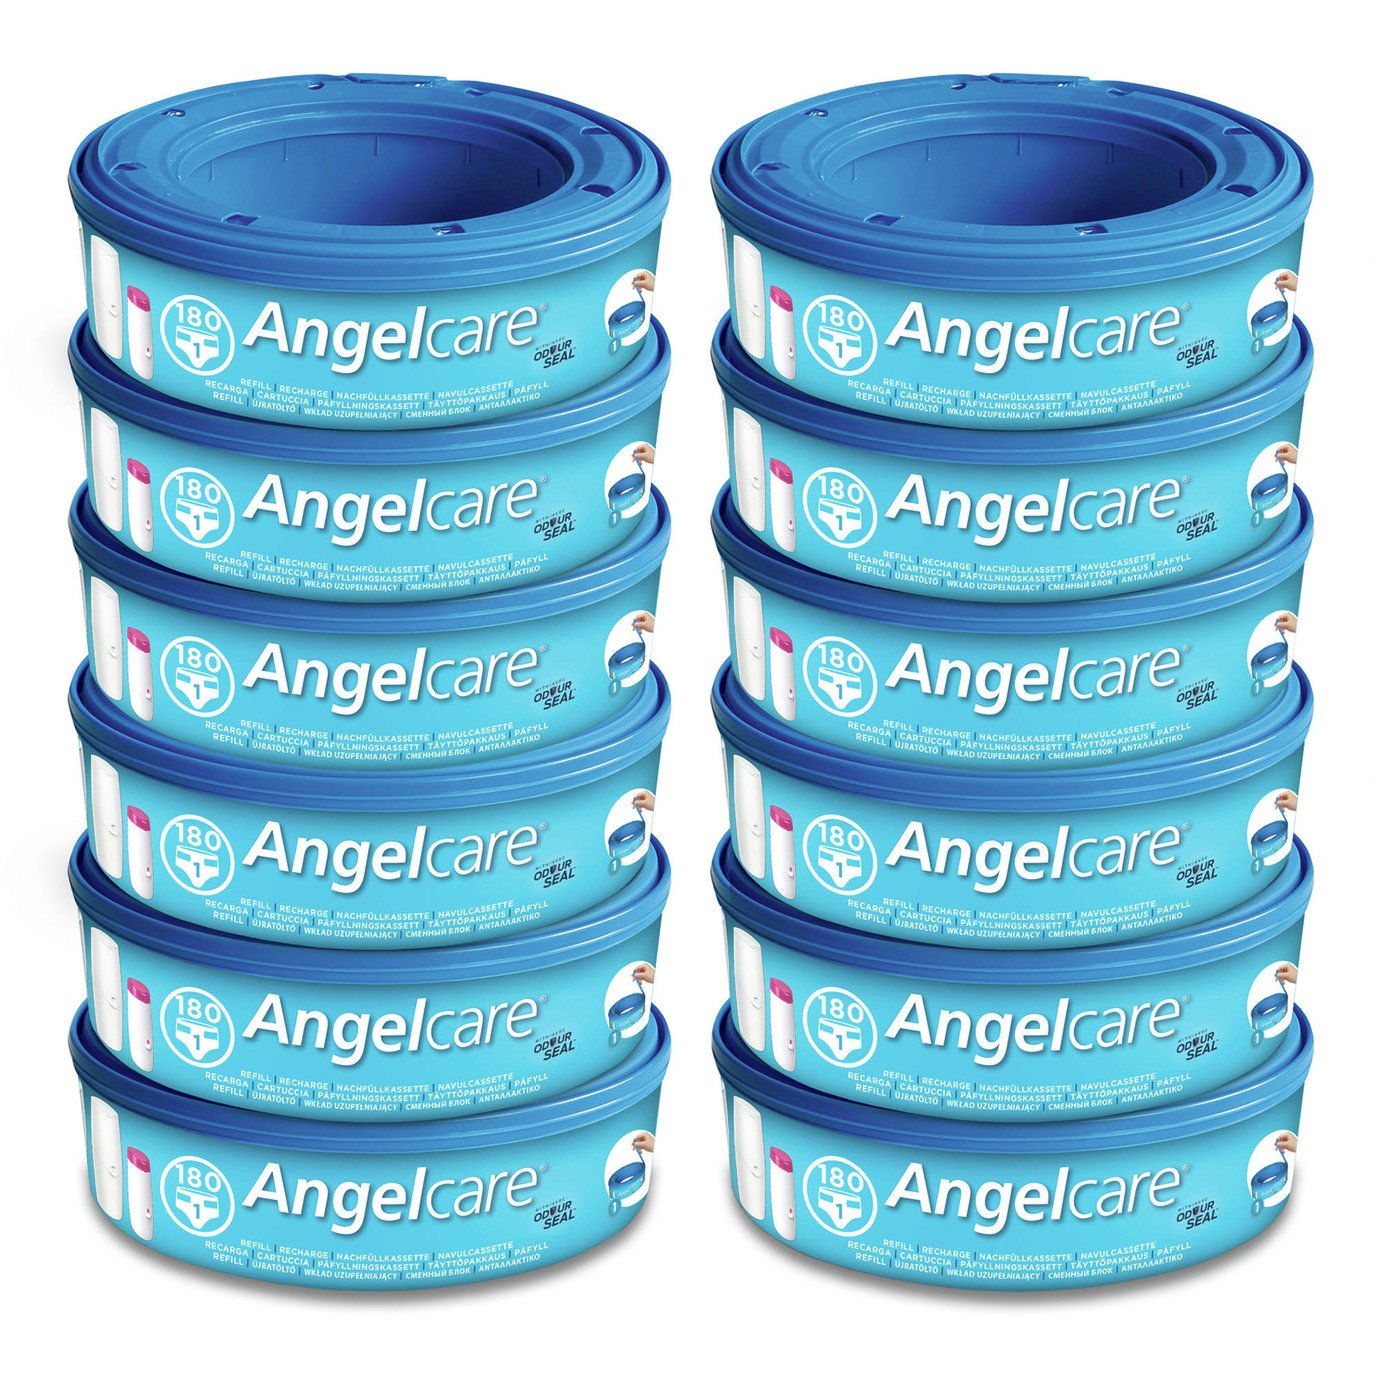 Angelcare Refill Cassettes Review